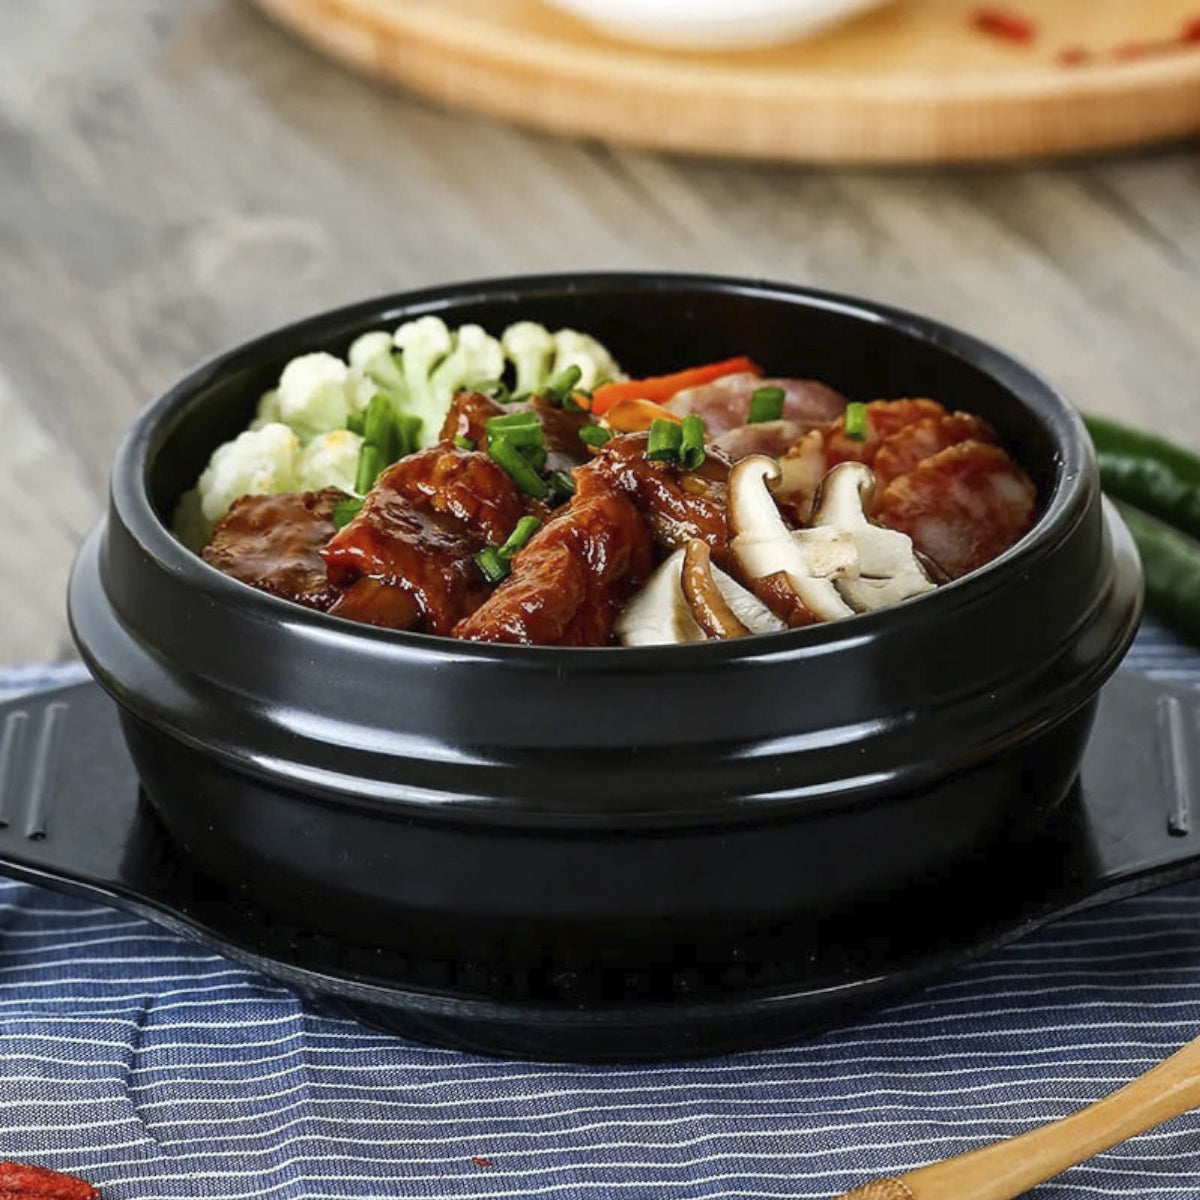 Ceramic Stone-Style Cooking Bowl